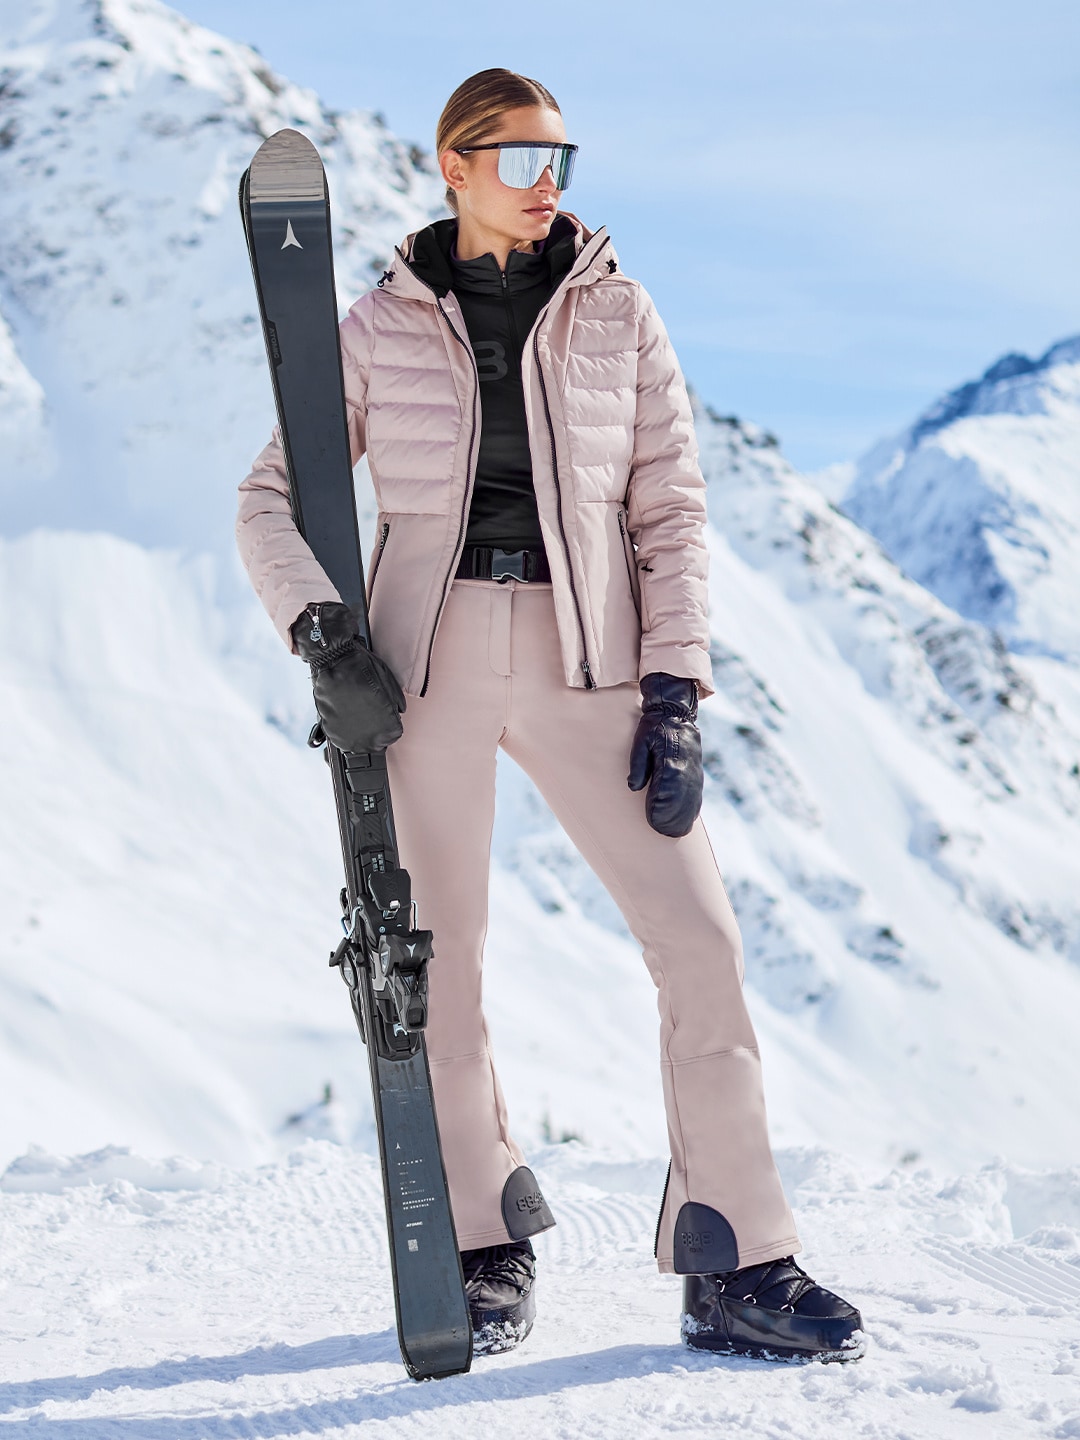 Turn Heads On The Slopes This Winter With These Chic Ski Fashion